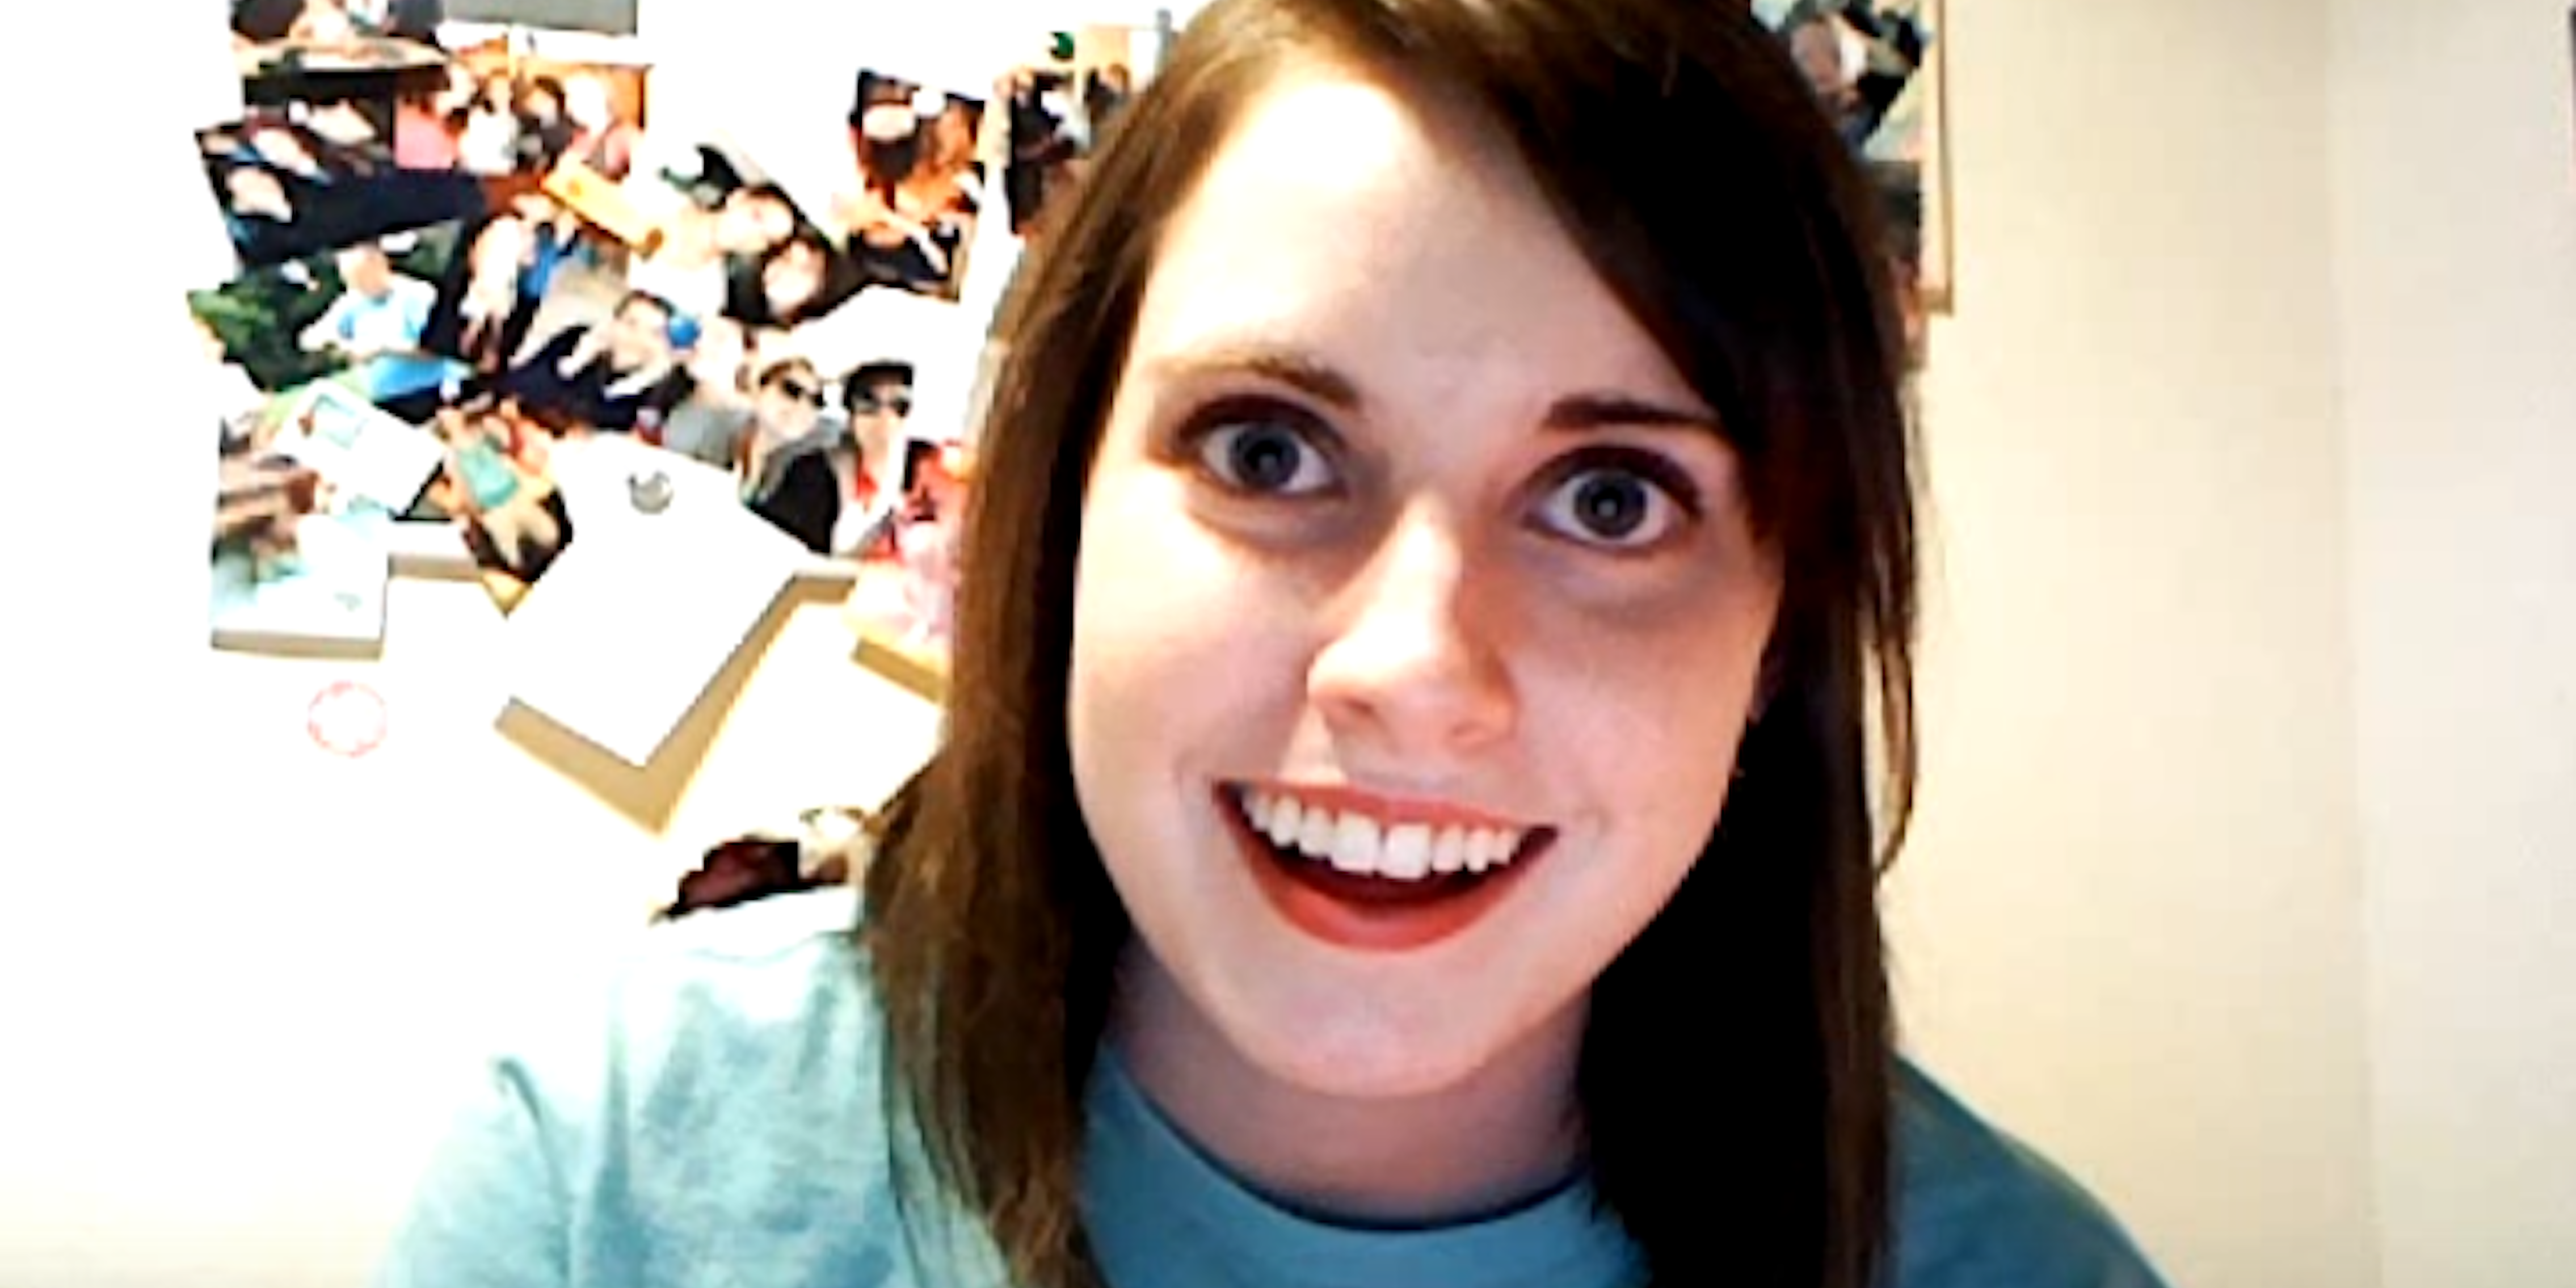 Overly Attached Girlfriend meme: Laina Morris